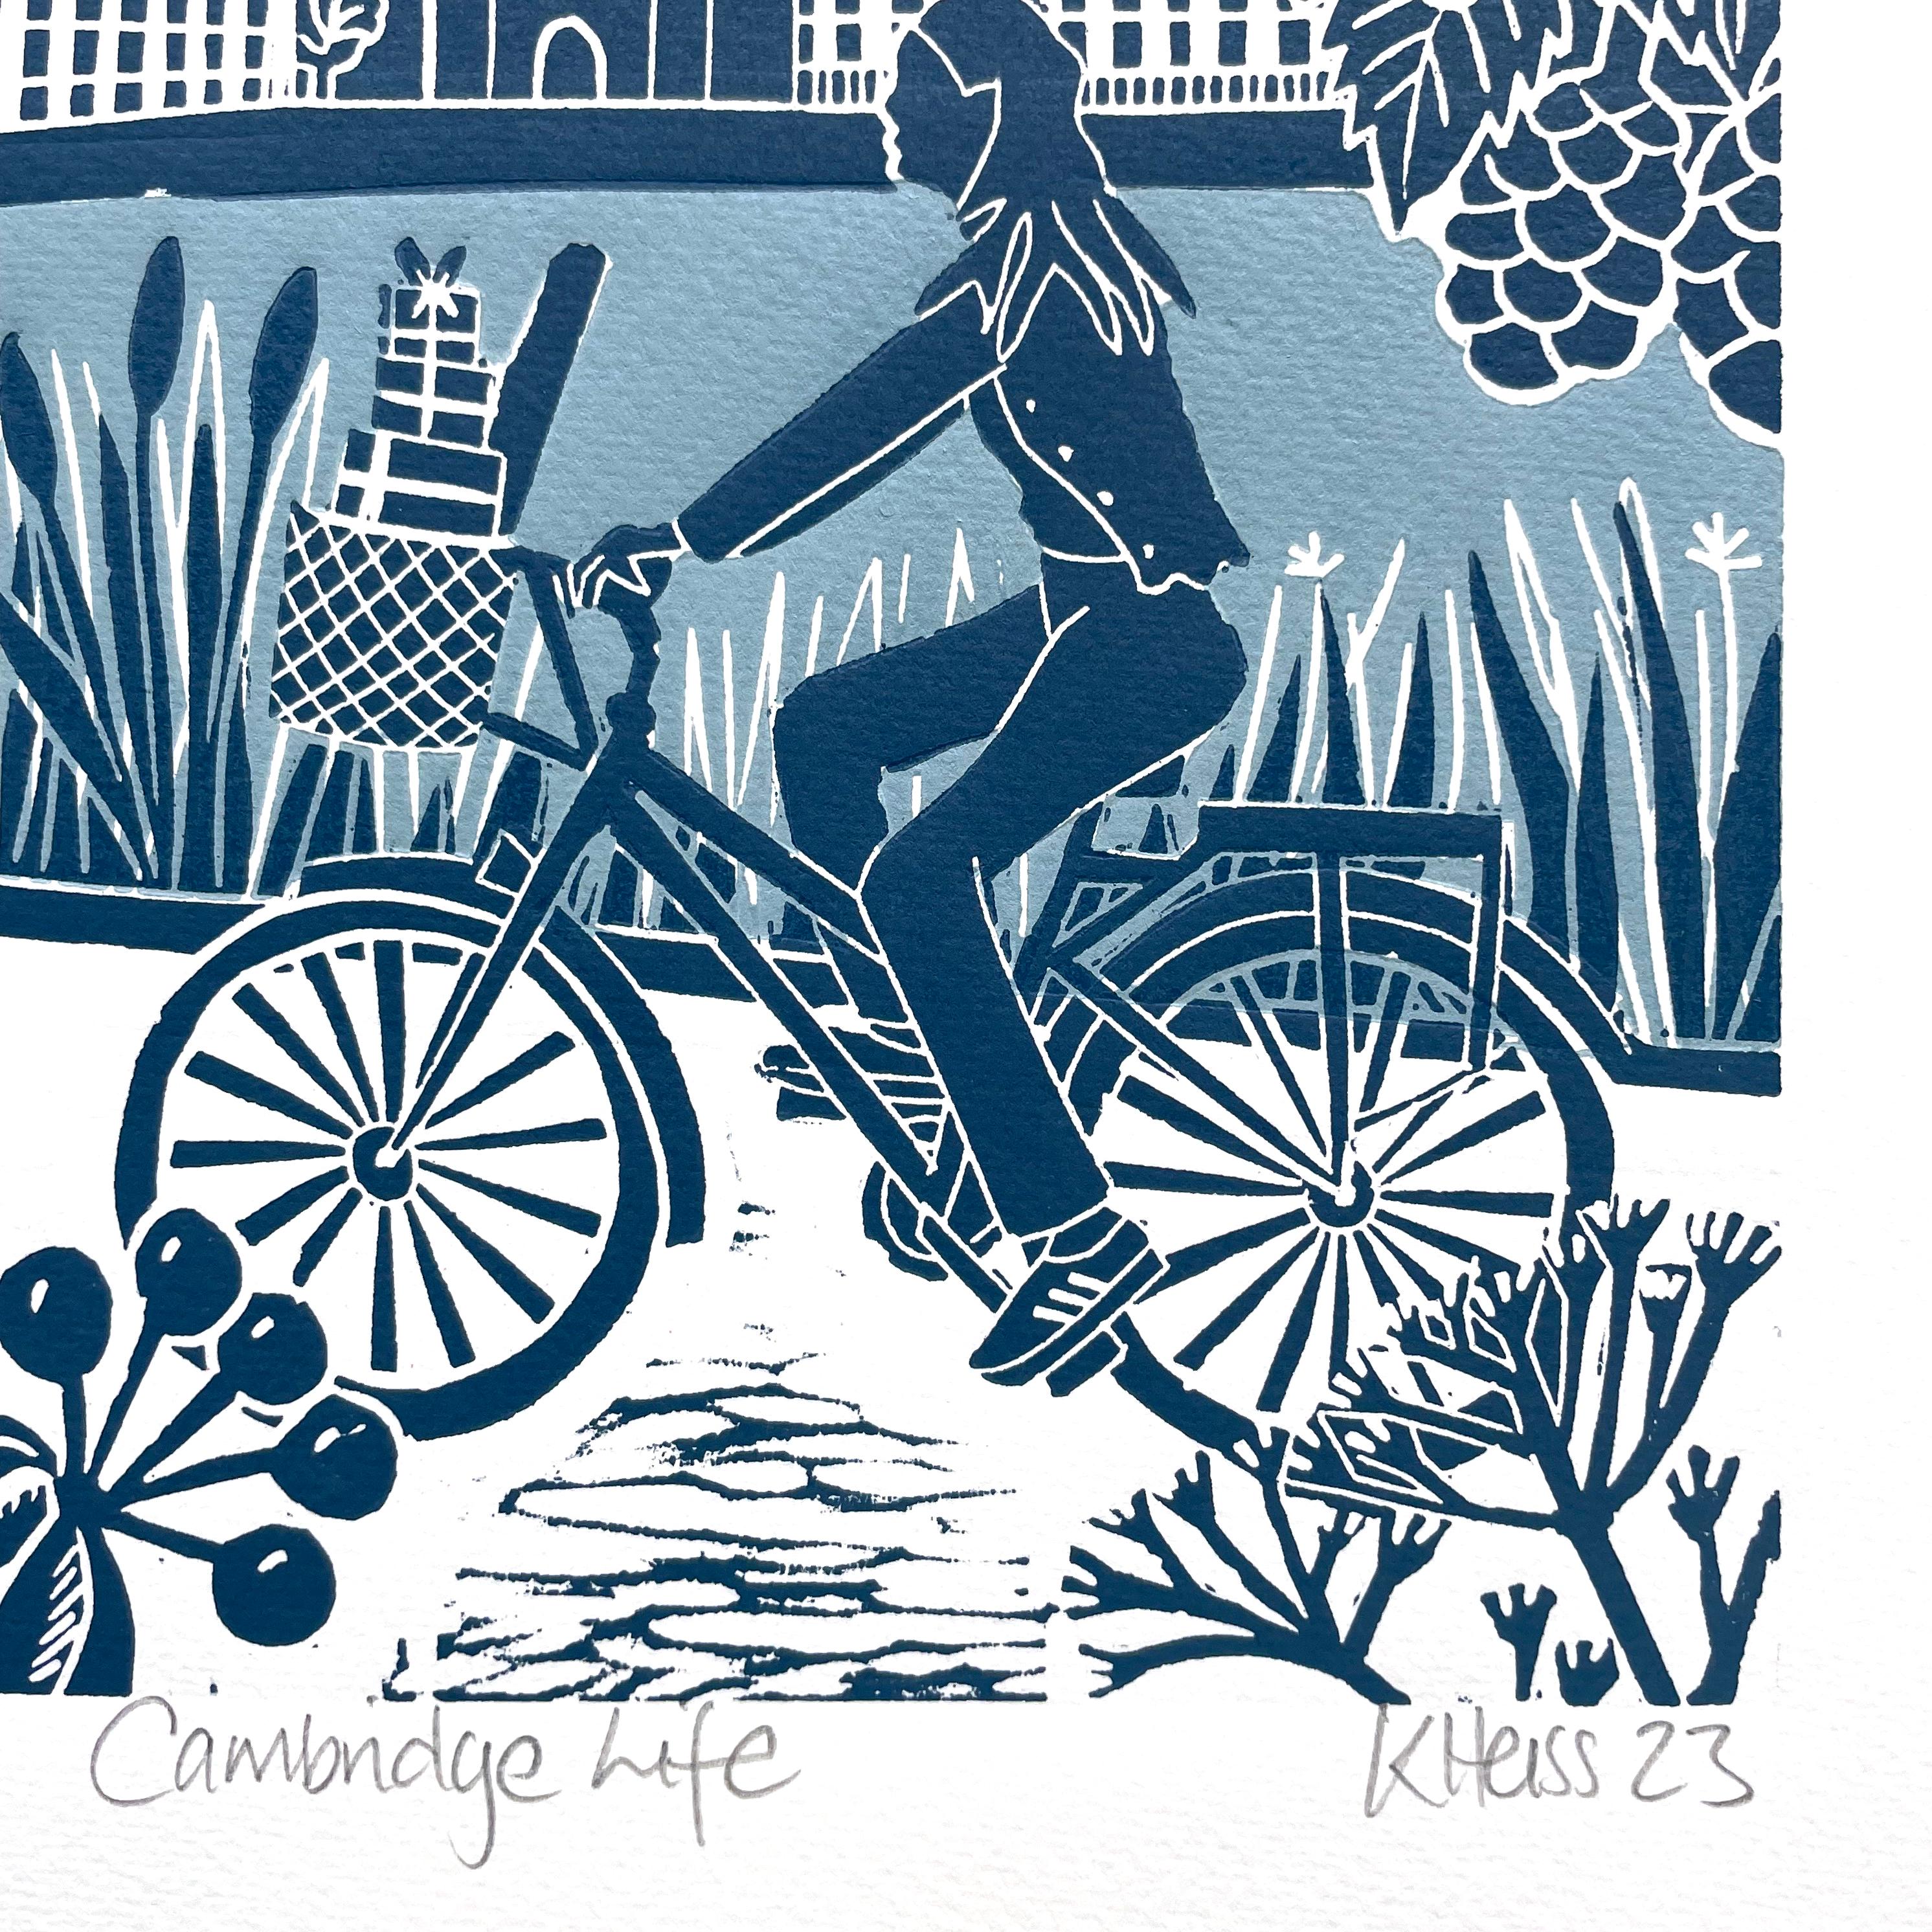 This is a handmade Linocut relief print of a cyclist riding along the Backs of Cambridge with Kings College Chapel in the distance and a robin in the foreground. It is a limited edition linocut printed with duck egg blue, Prussian blue and scarlet